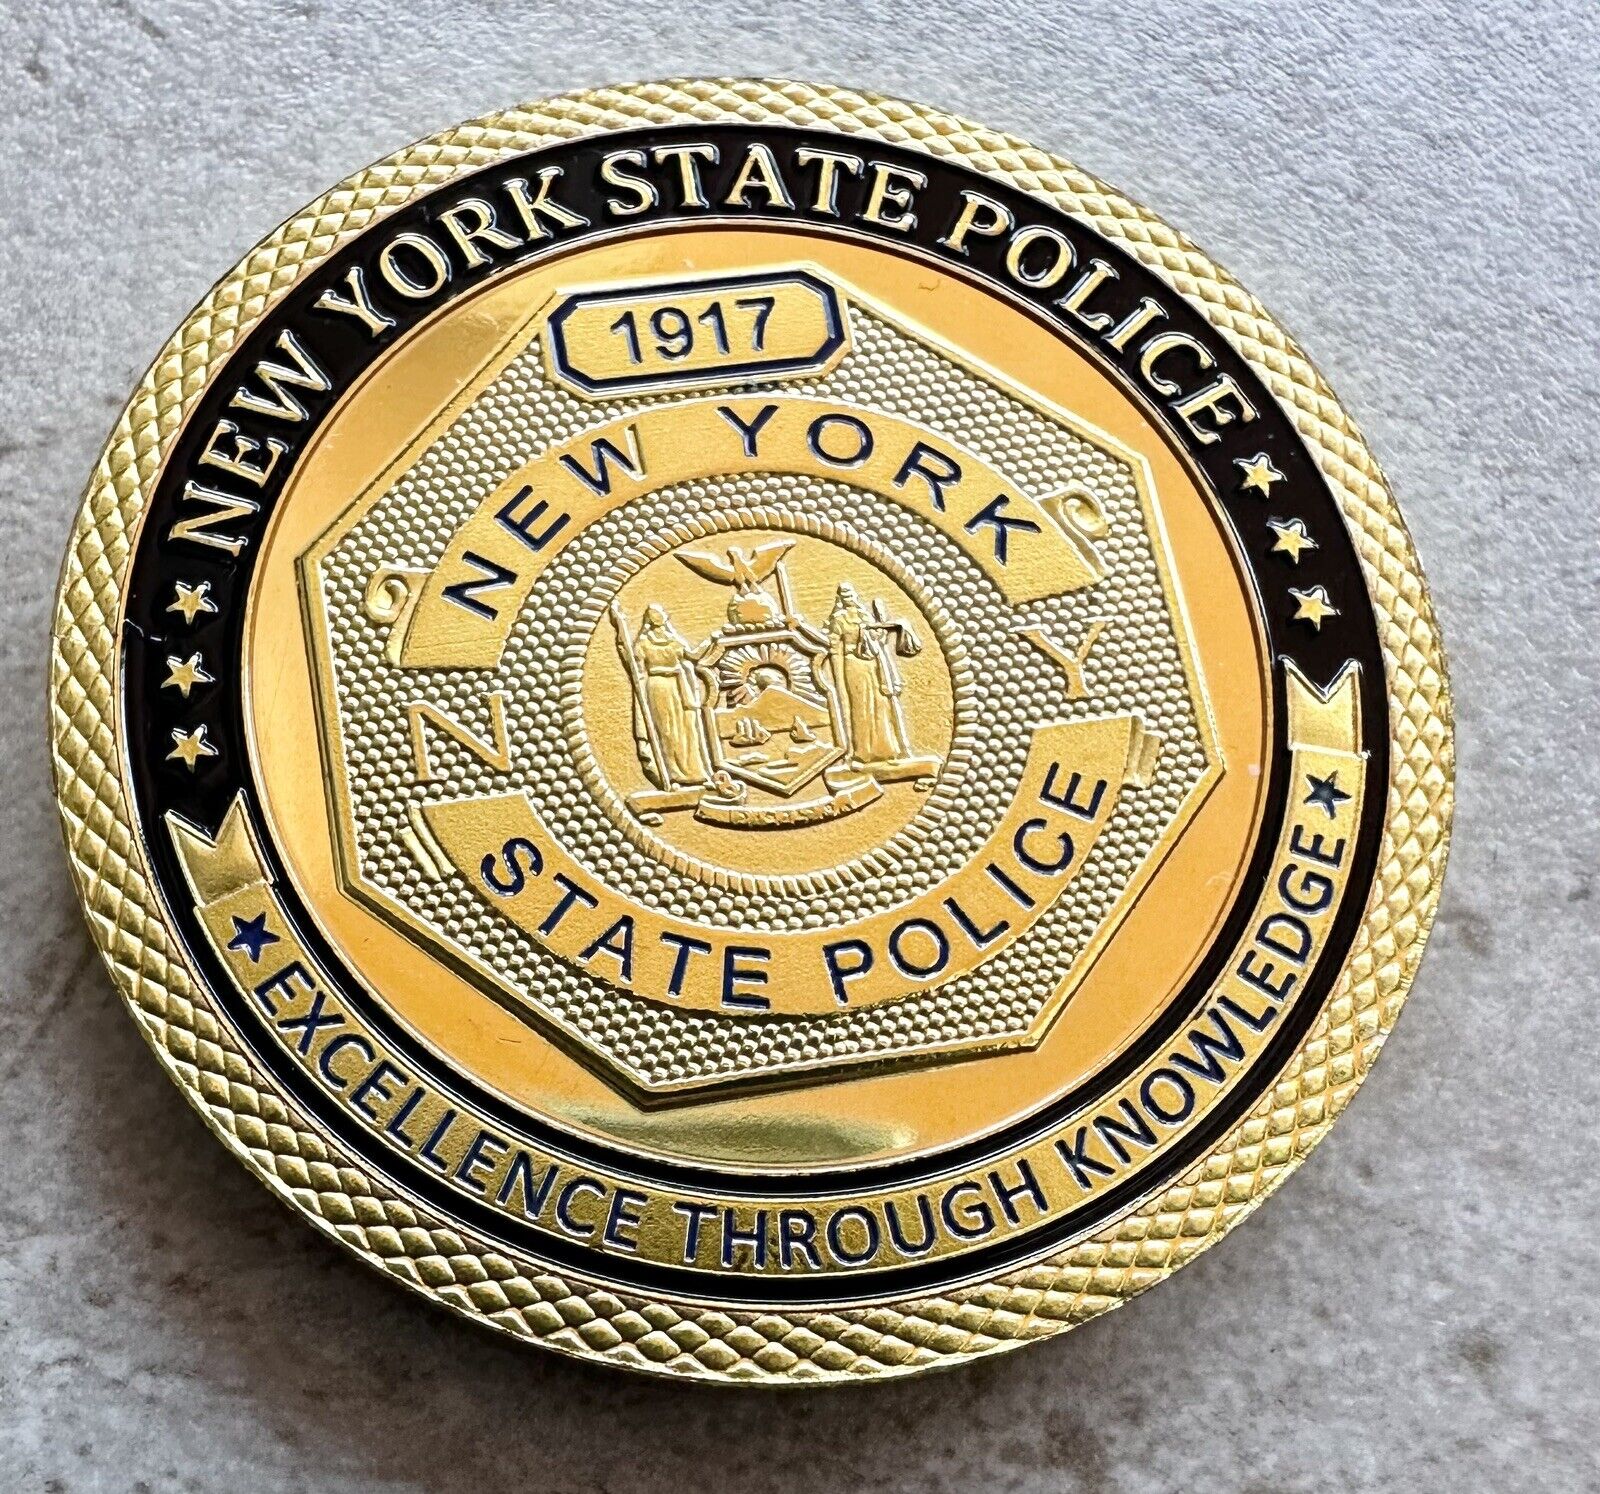 NYPD NEW YORK STATE POLICE OFFICER  Challenge Coin